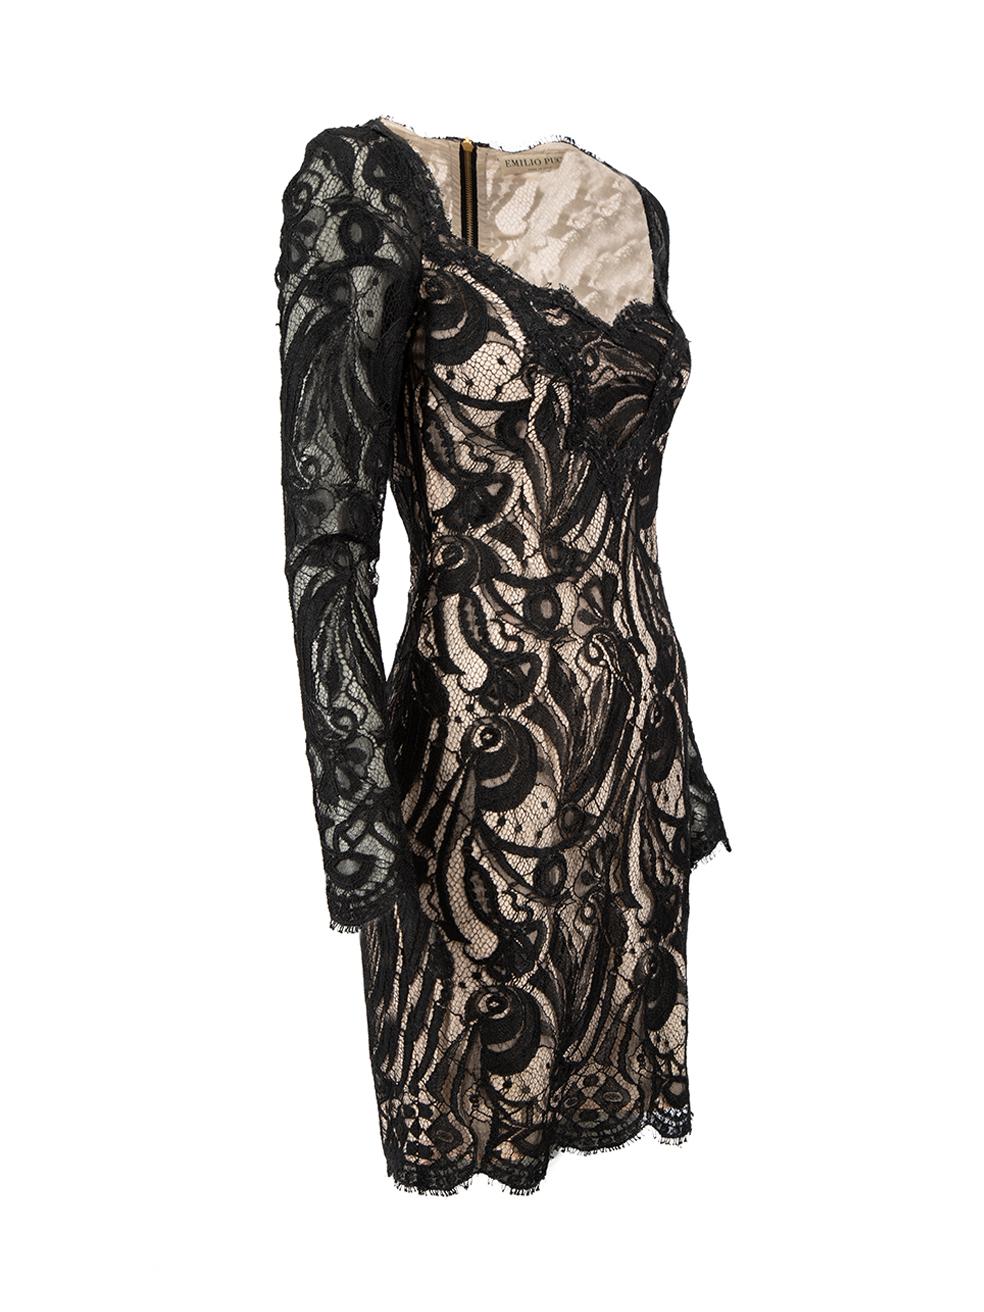 CONDITION is Good. General wear to dress is evident. Moderate signs of wear to the all-over lace with fraying, as well as a hole to the rear-left on this used Emilio Pucci designer resale item.



Details


Black

Lace

Mini dress

Sweetheart